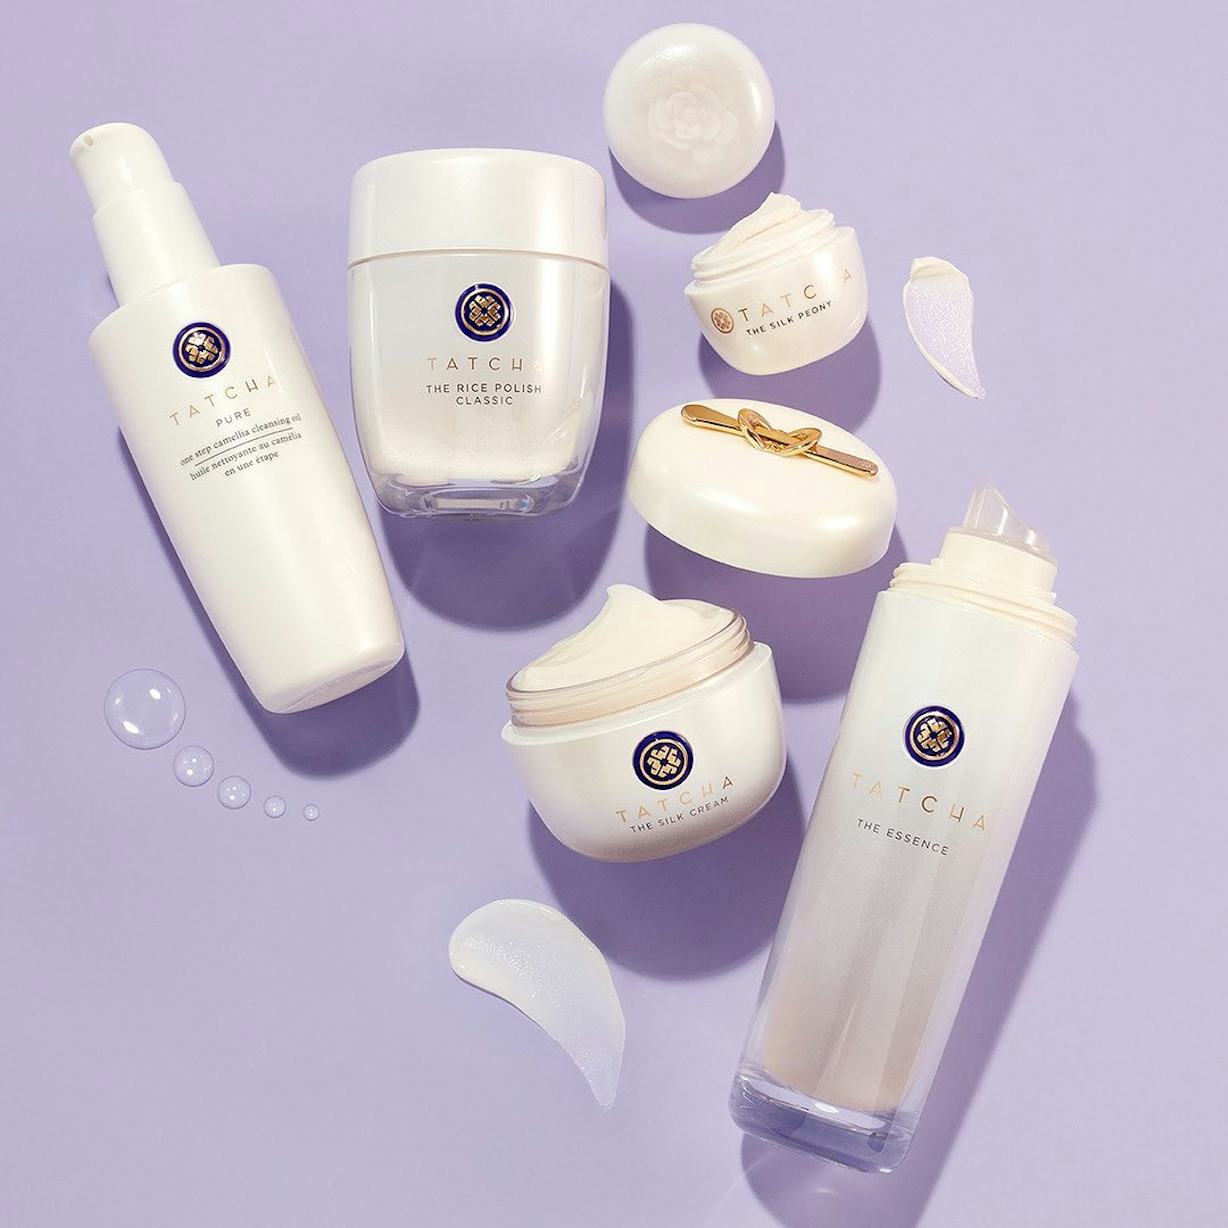 Tatcha's Black Friday Sale Offers Up To 20 Off Your ENTIRE Purchase